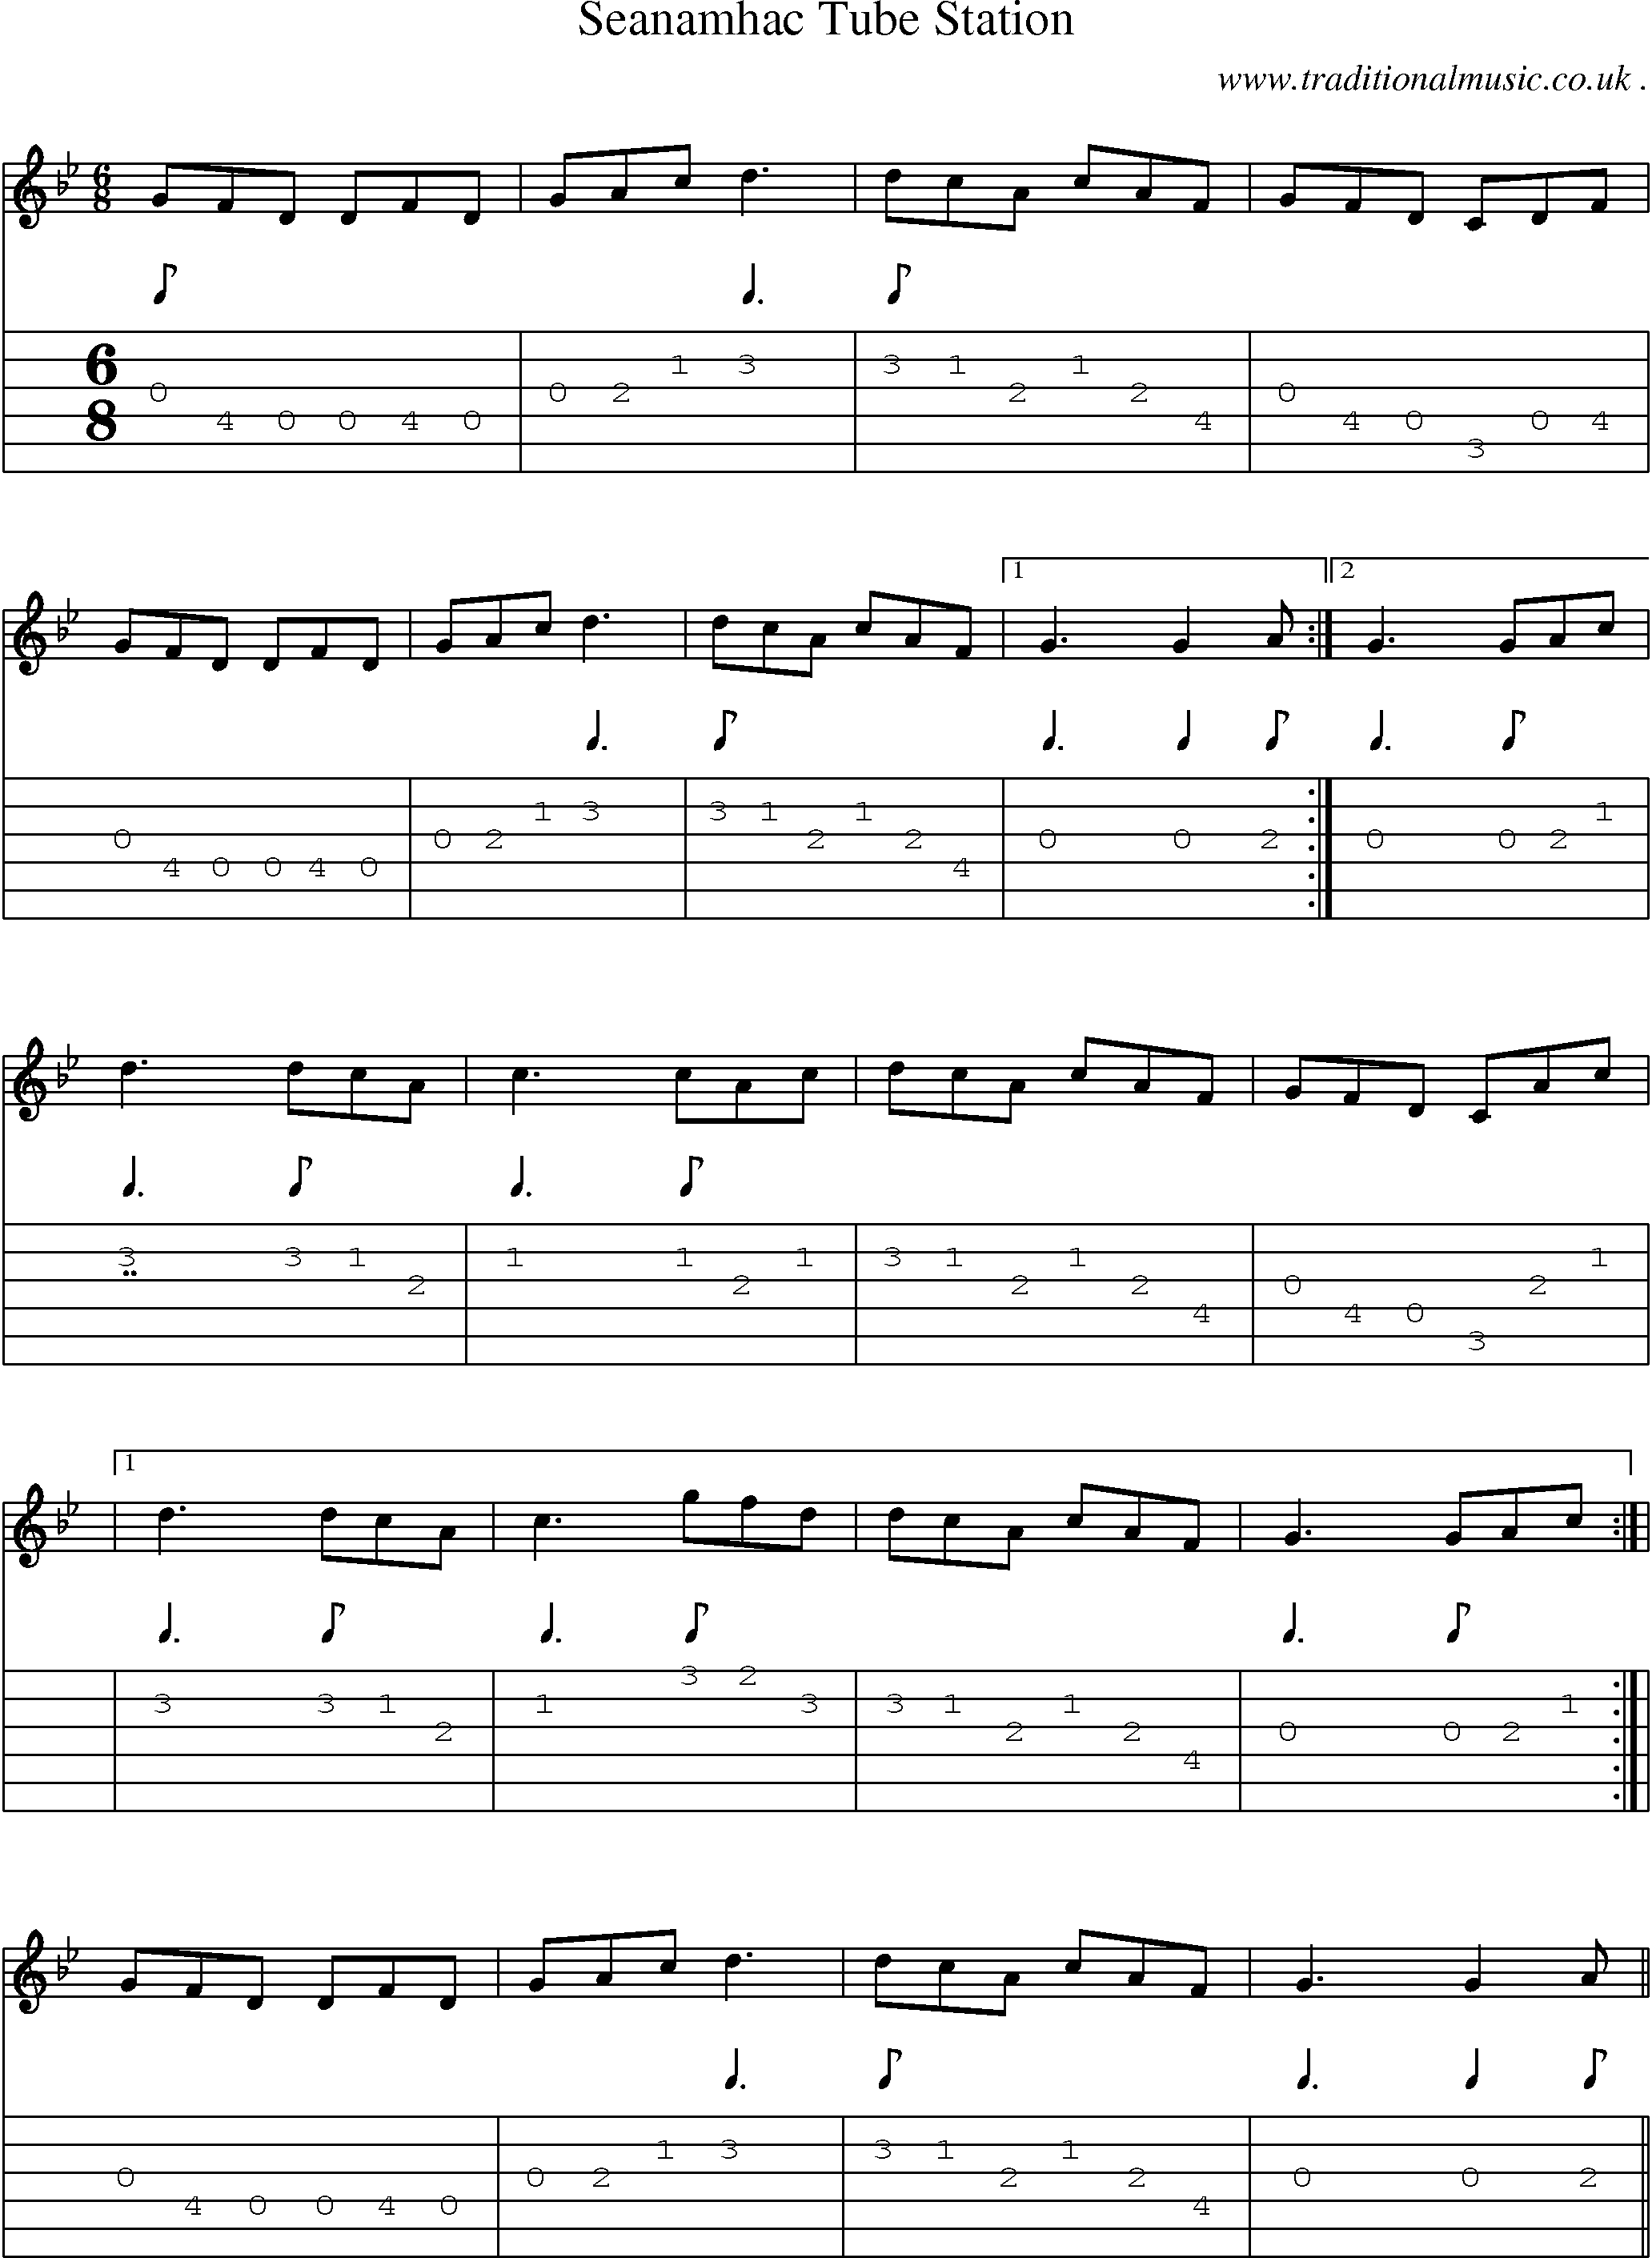 Sheet-Music and Guitar Tabs for Seanamhac Tube Station